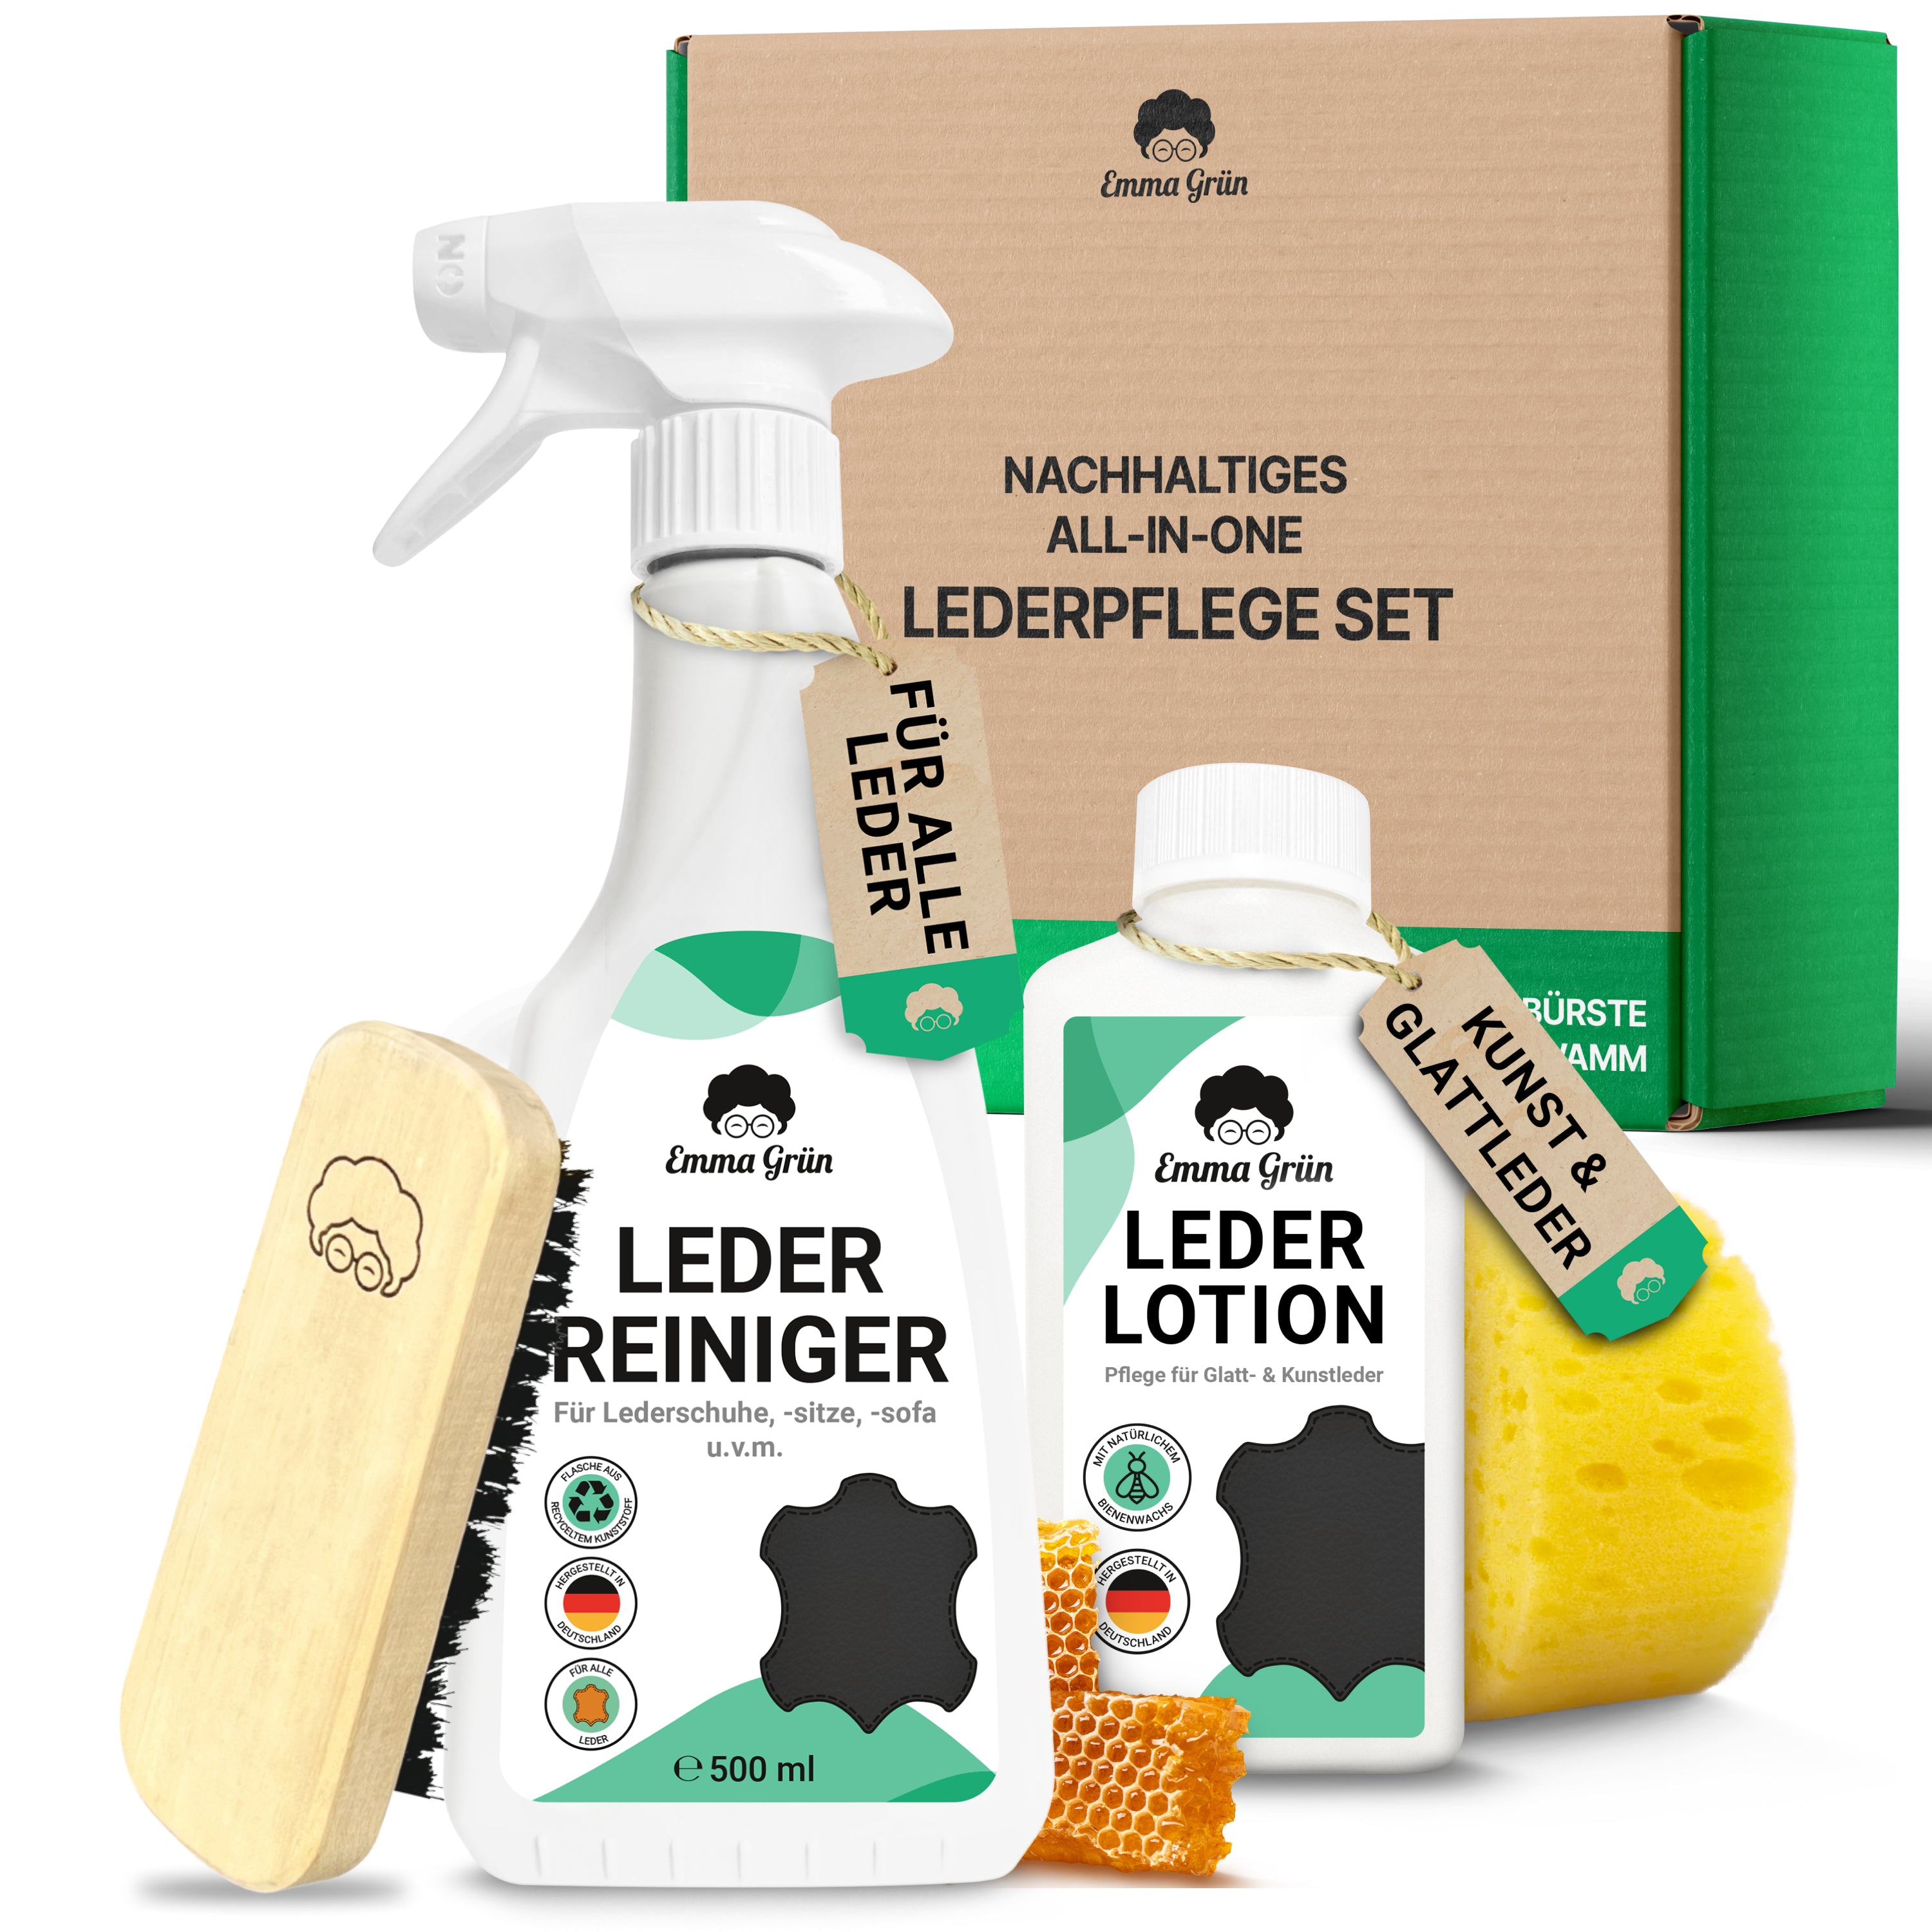 "Clean &amp; well-maintained" economy set with leather cleaner &amp; leather lotion